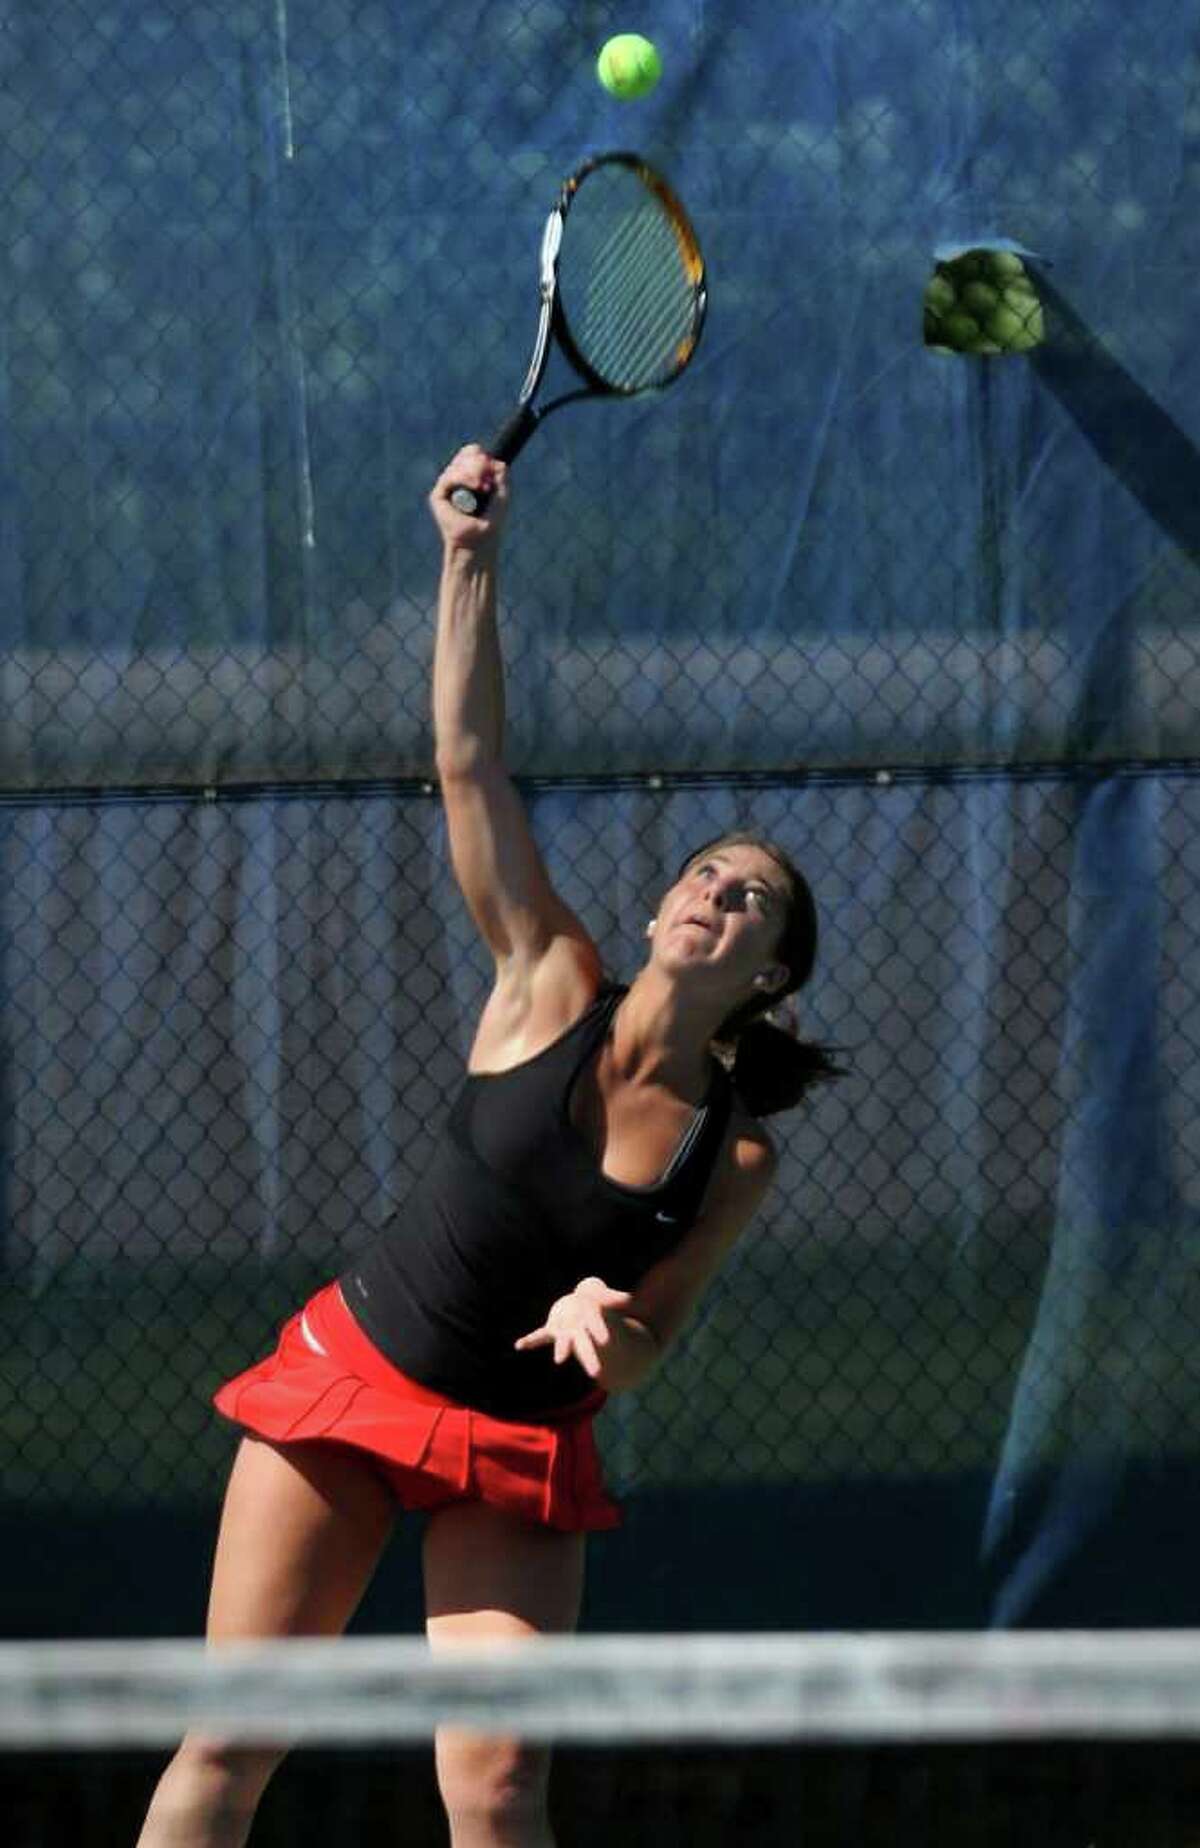 New Canaan's #2 singles Courtney Gallagher serves the ball, during state tournament girls tennis action against Glastonbury's Selina Nephuth at the Yale tennis complex in New Haven, Conn. on Friday June 3, 2011.